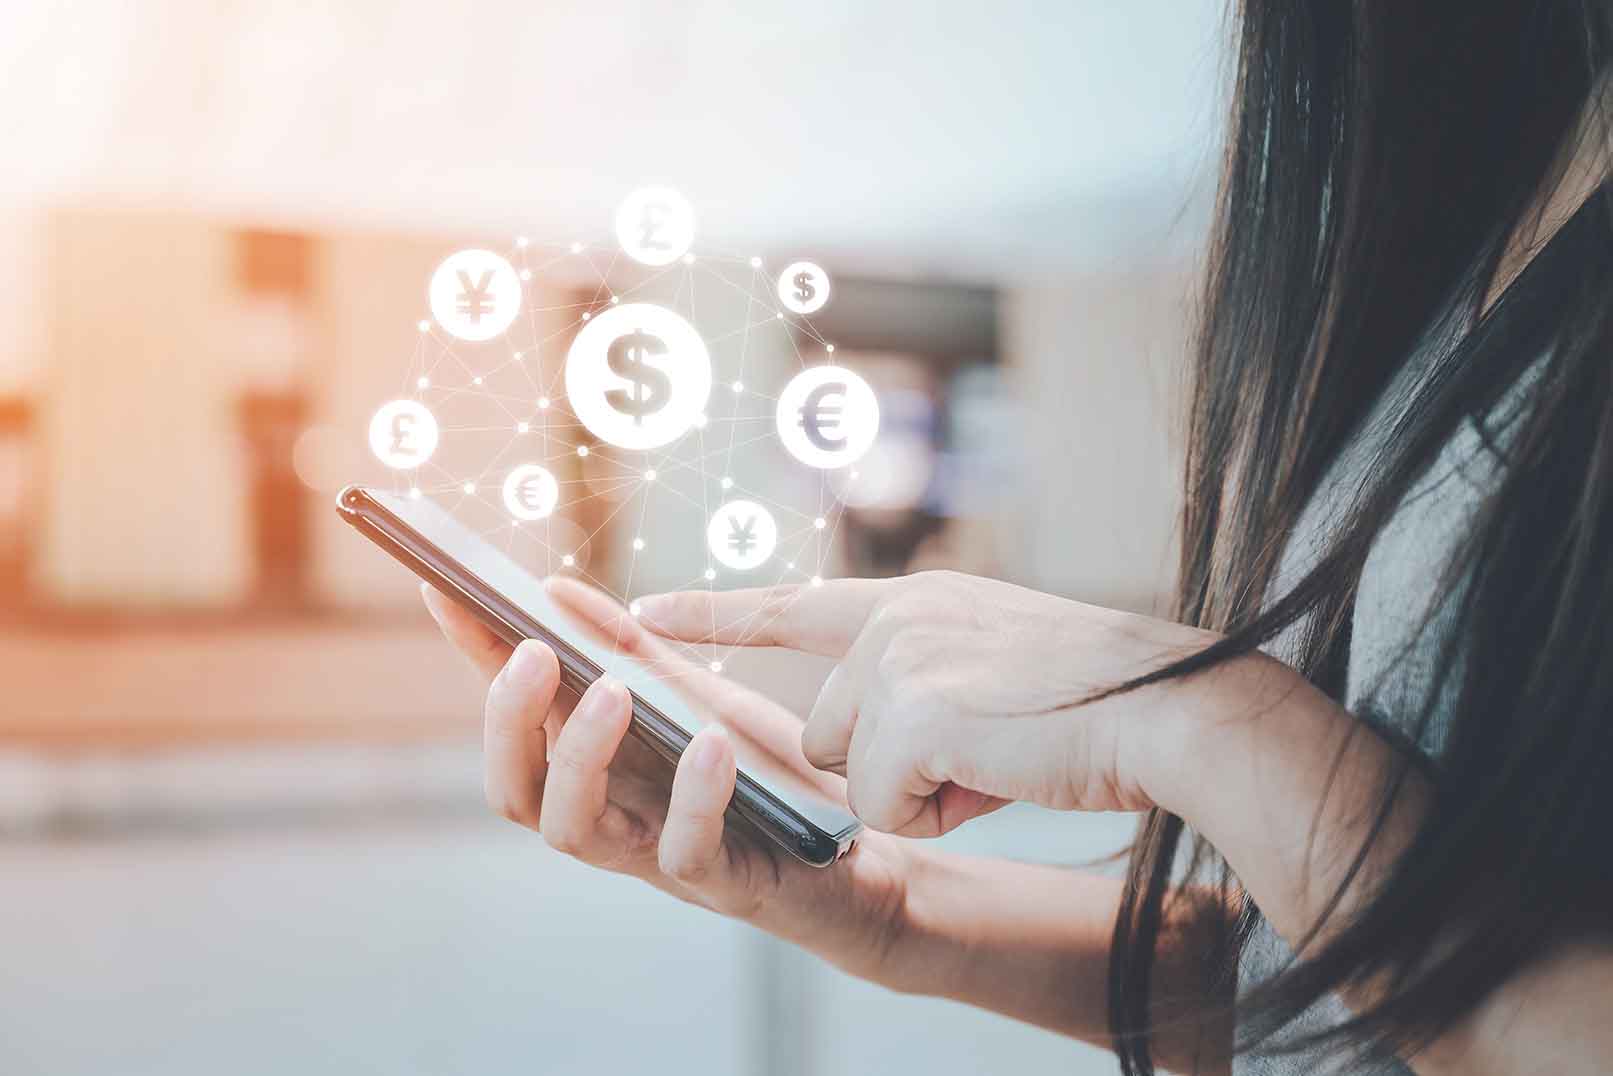 Customized FinTech Apps to Automate Financial Services